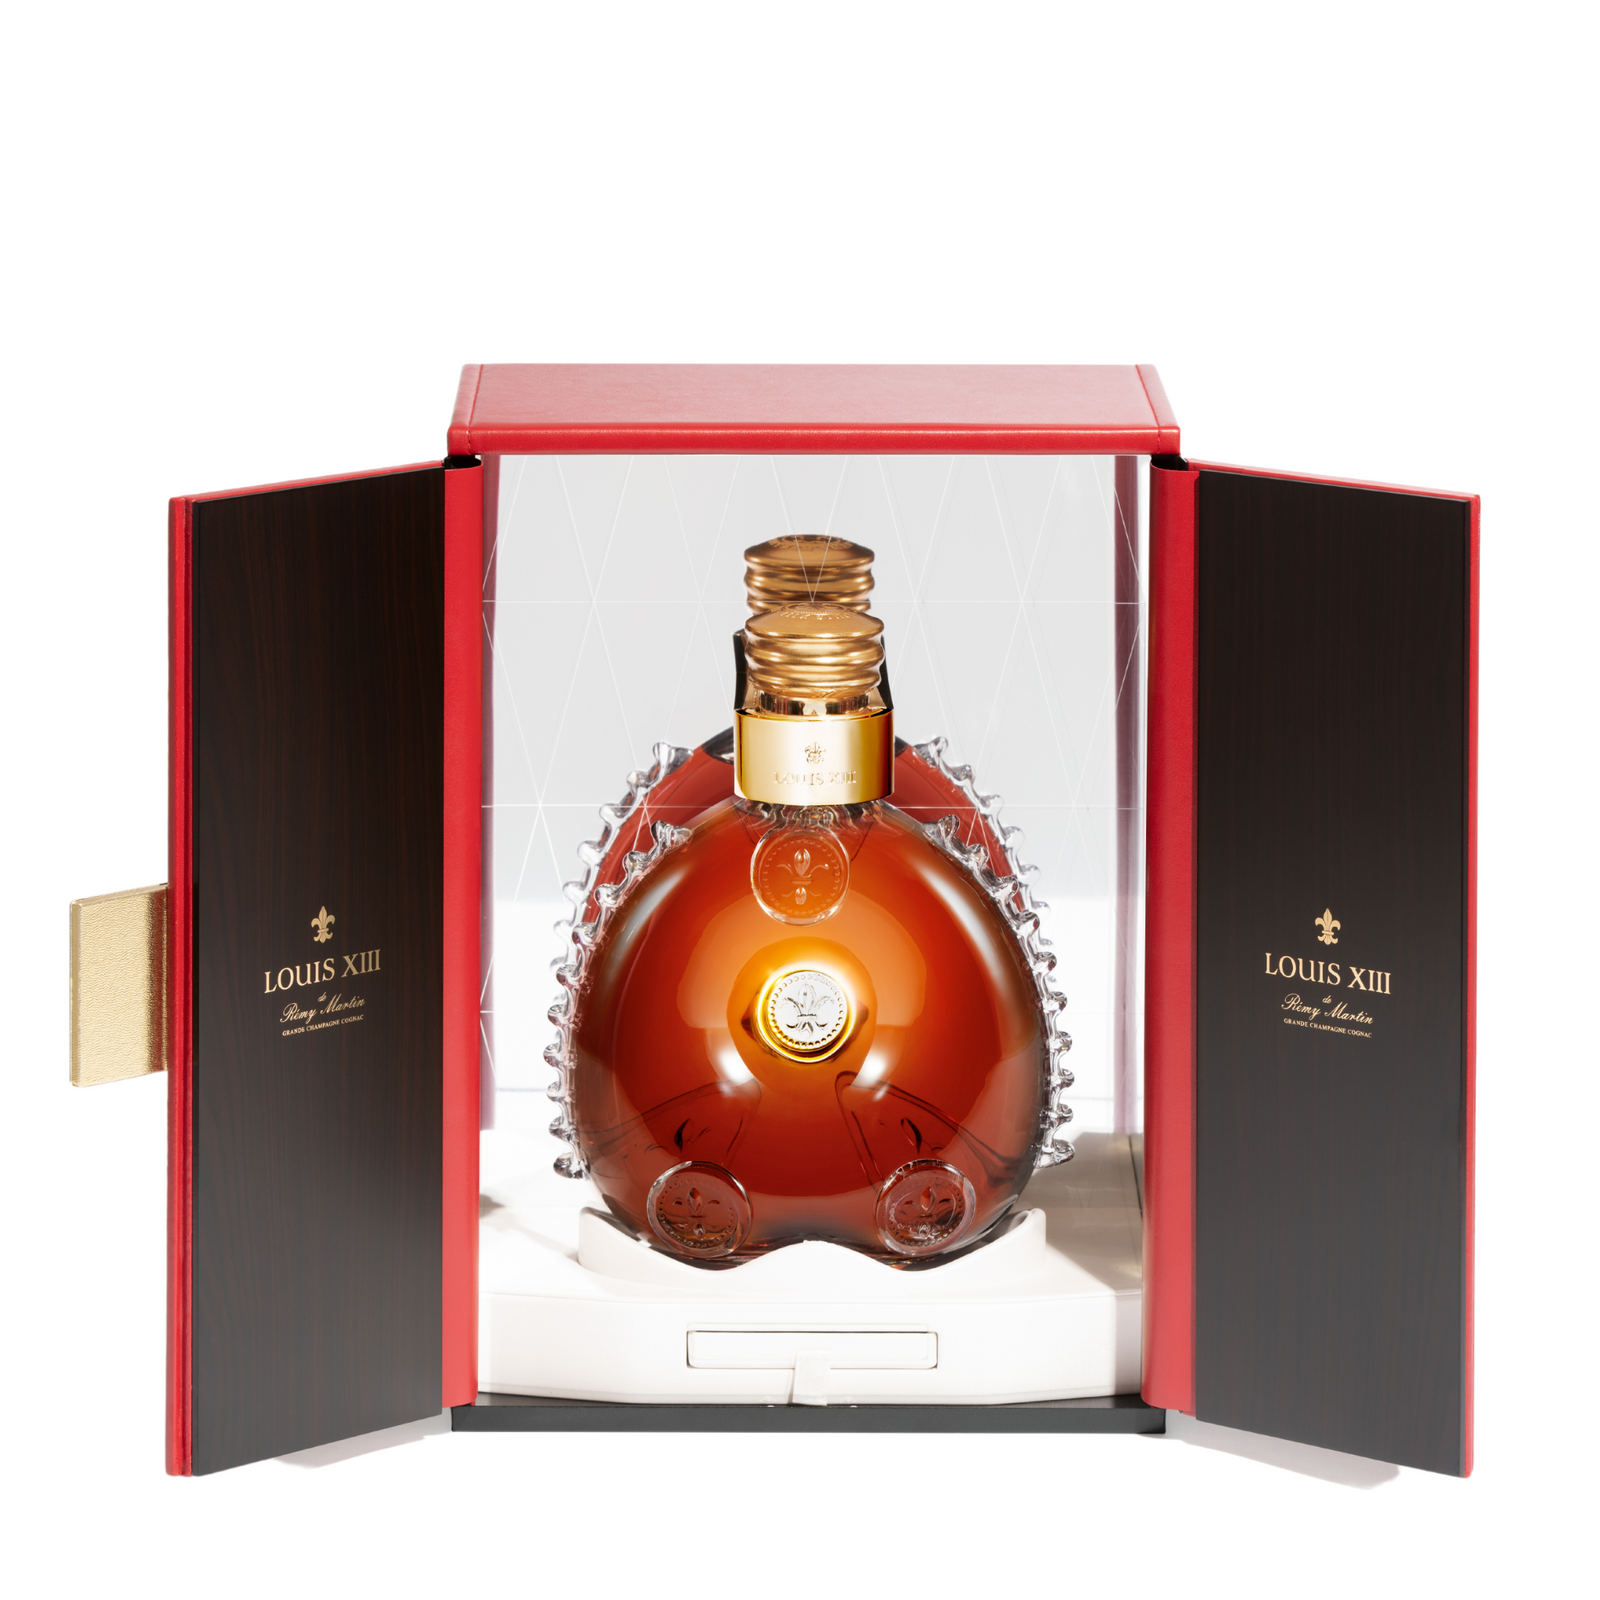 A packshot of LOUIS XIII decanter in a red open packaging, white background